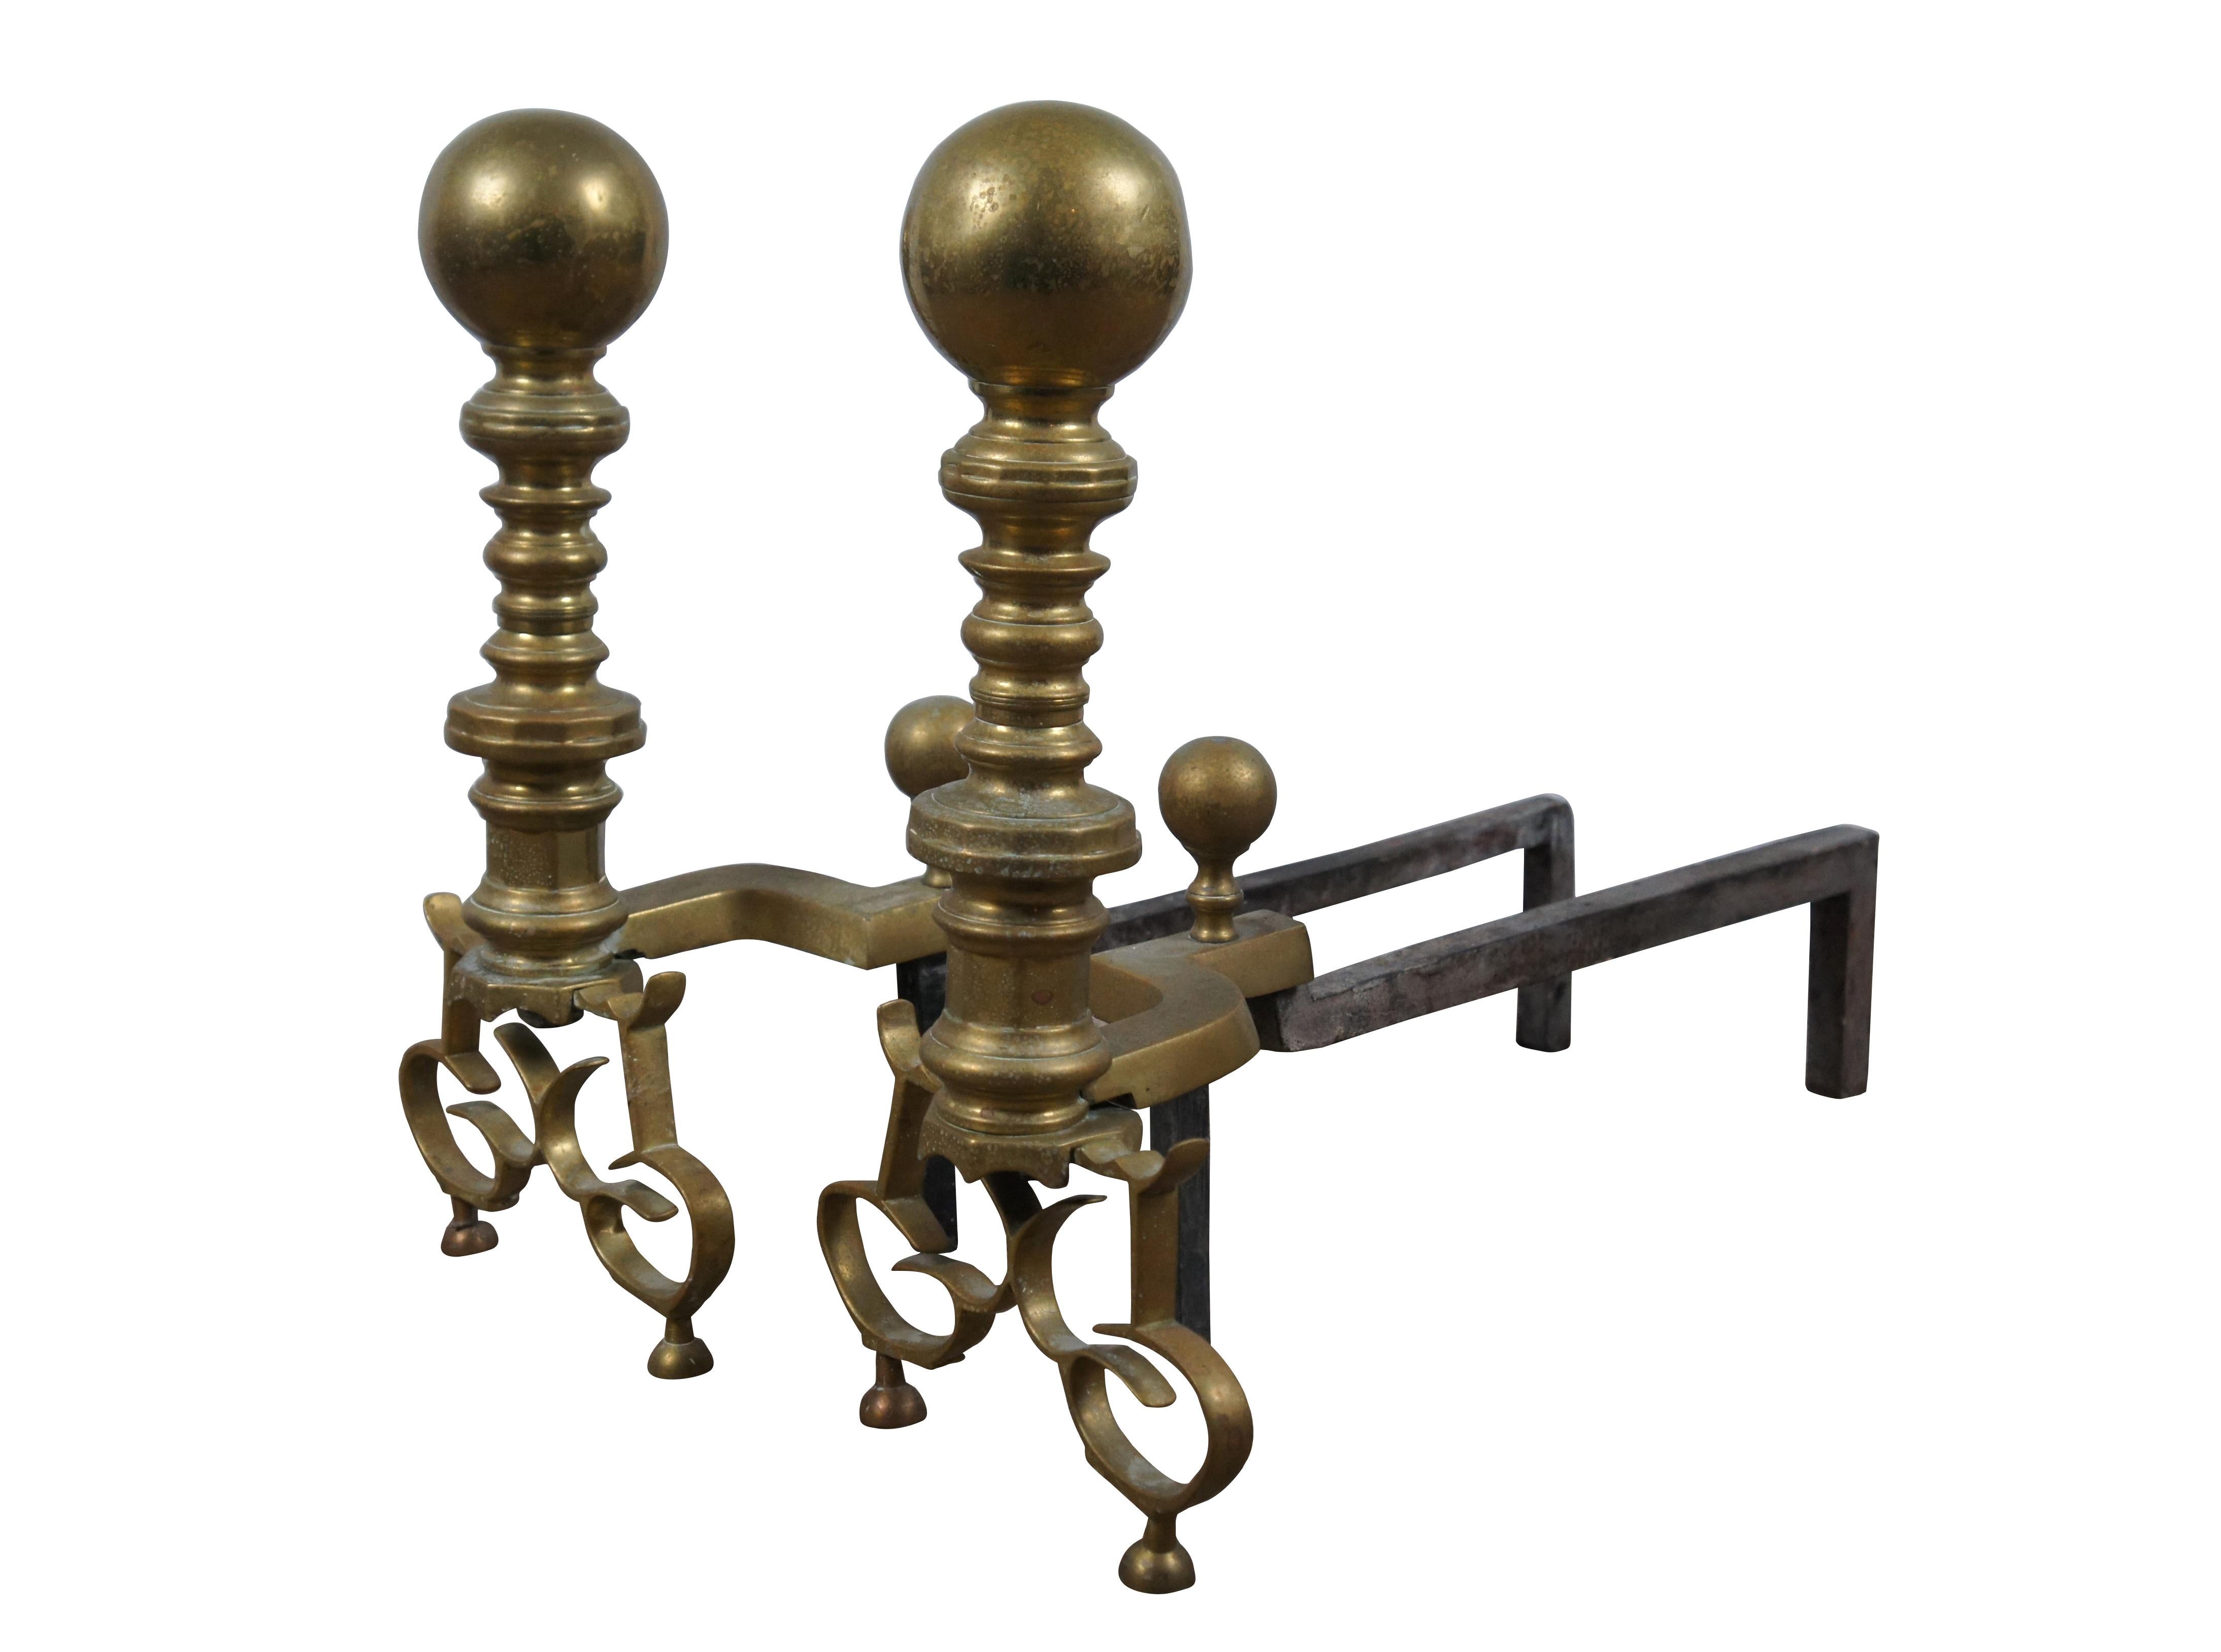 Pair of antique Georgian brass and iron andirons / fire dogs featuring cannonball tops on turned baluster pillars with ornate delicate scrolled feet.

Dimensions:
9.25